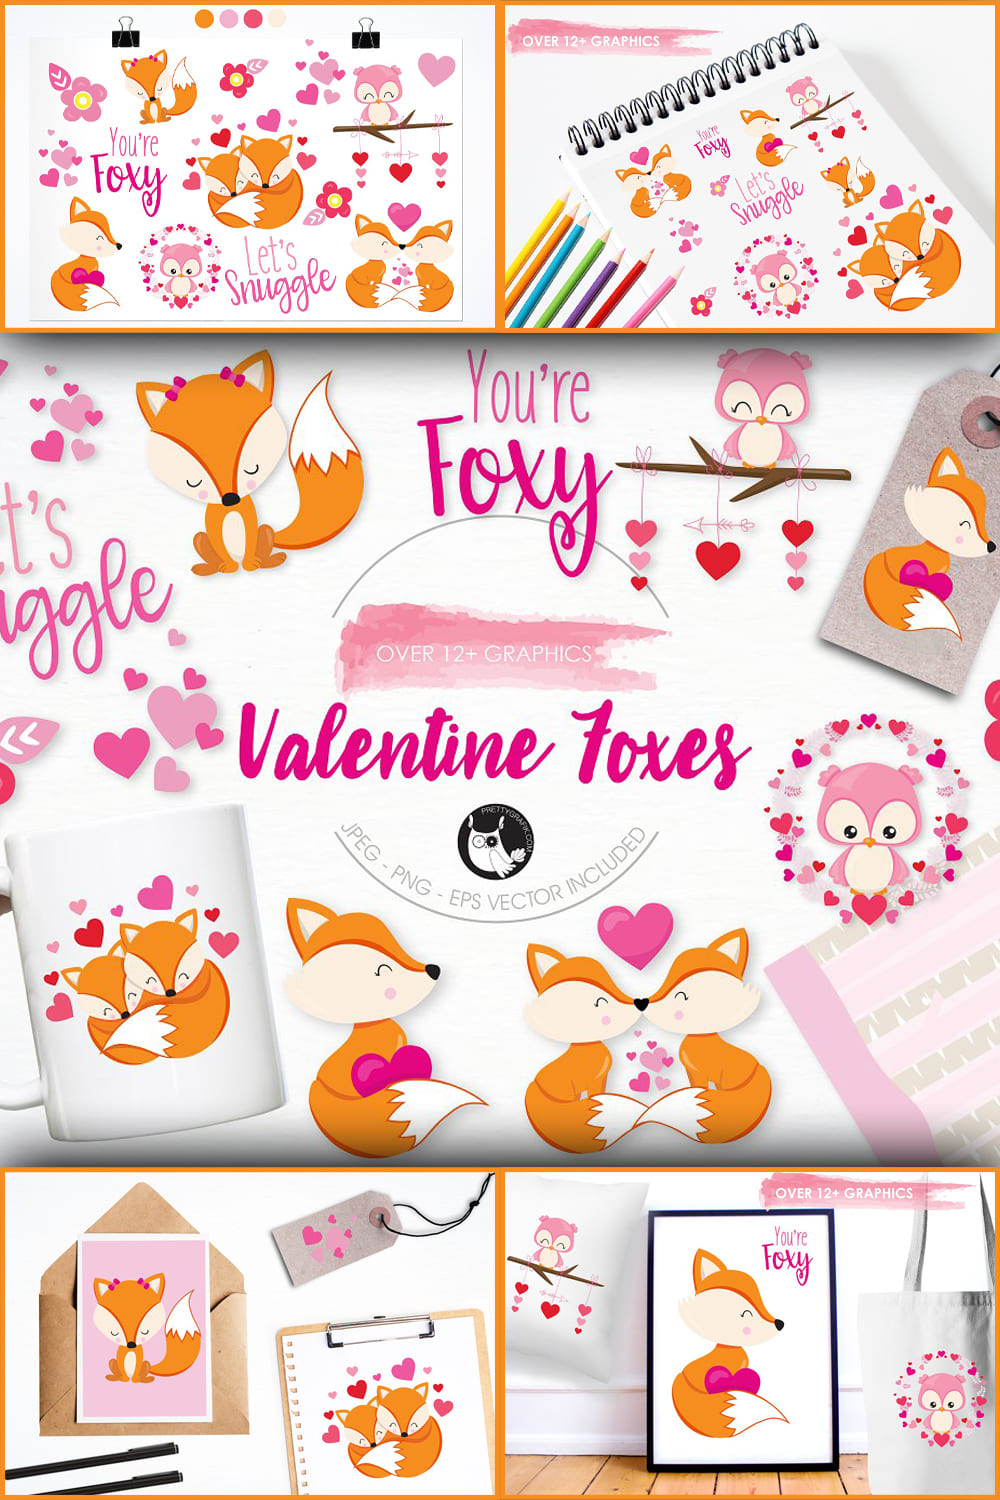 Valentine foxes illustration pack - pinterest image preview.